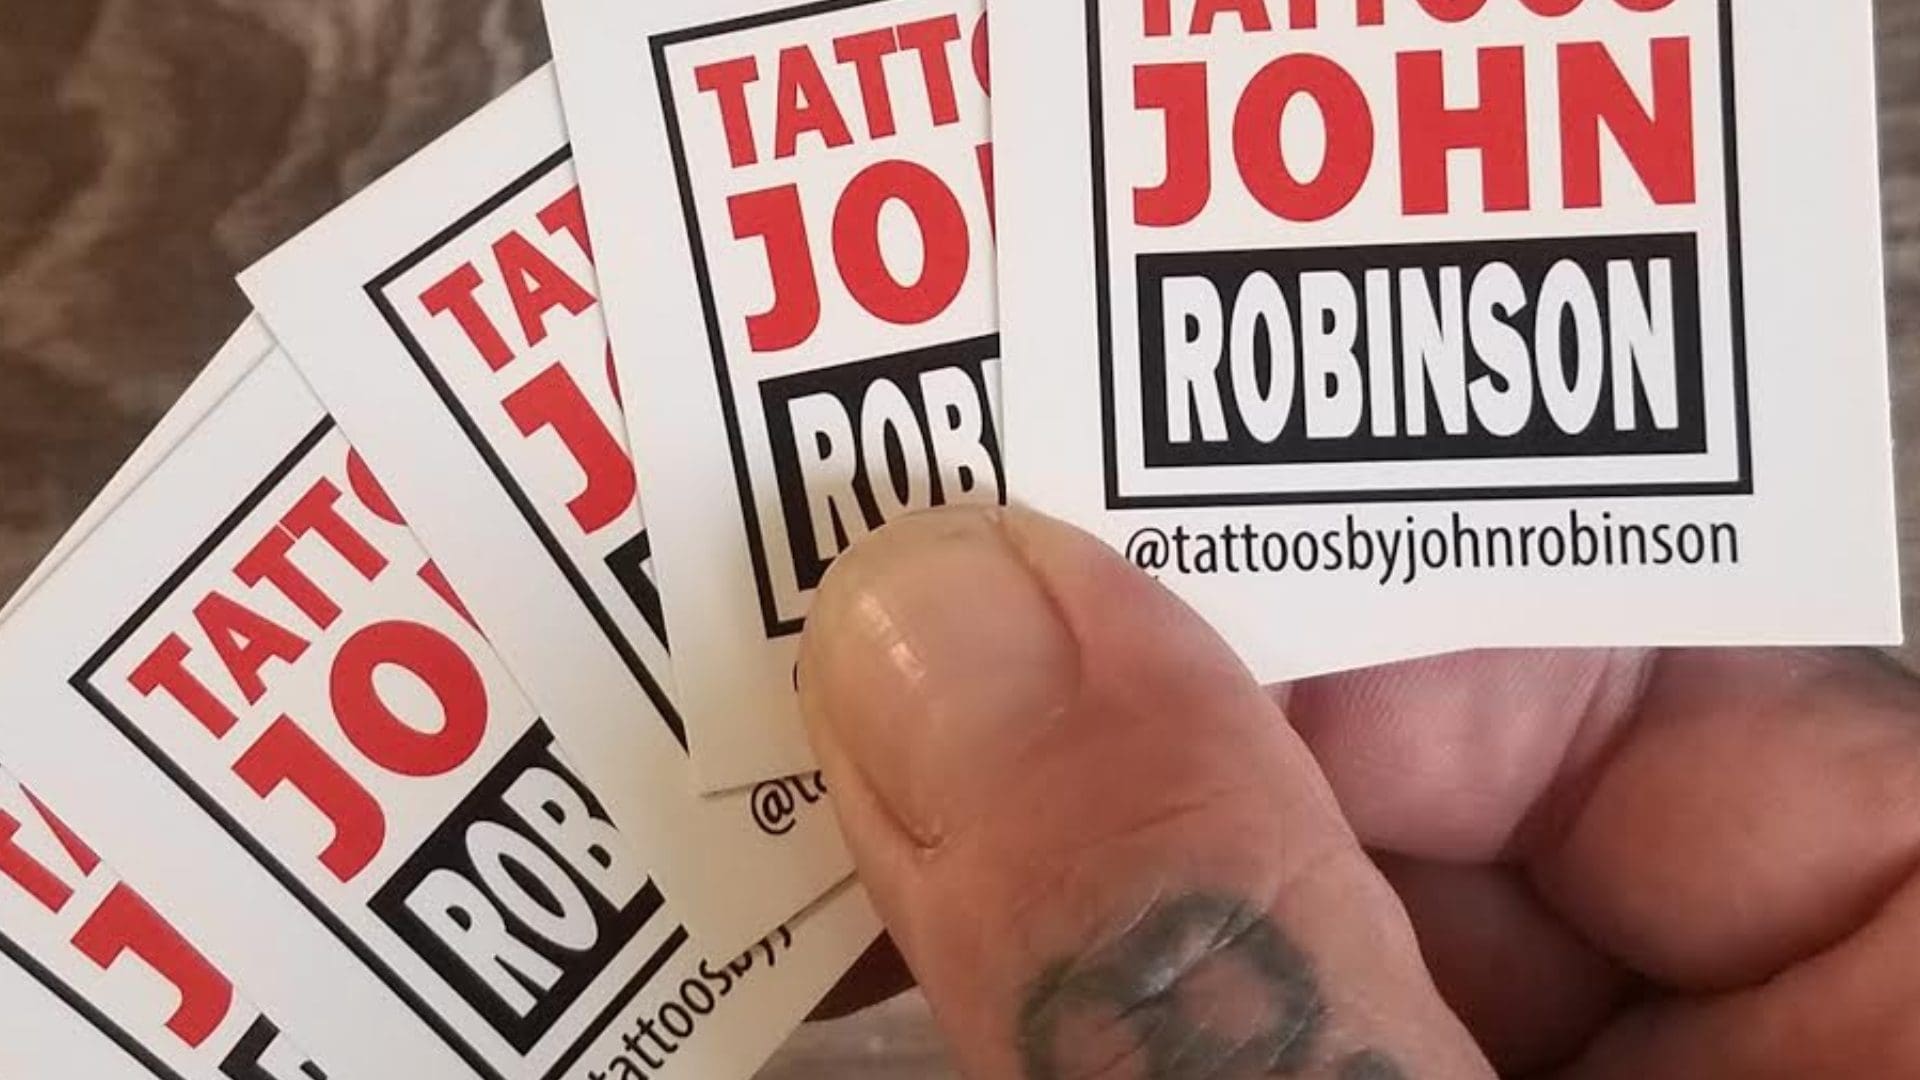 Square Business Cards for Tattoo Artist (4)